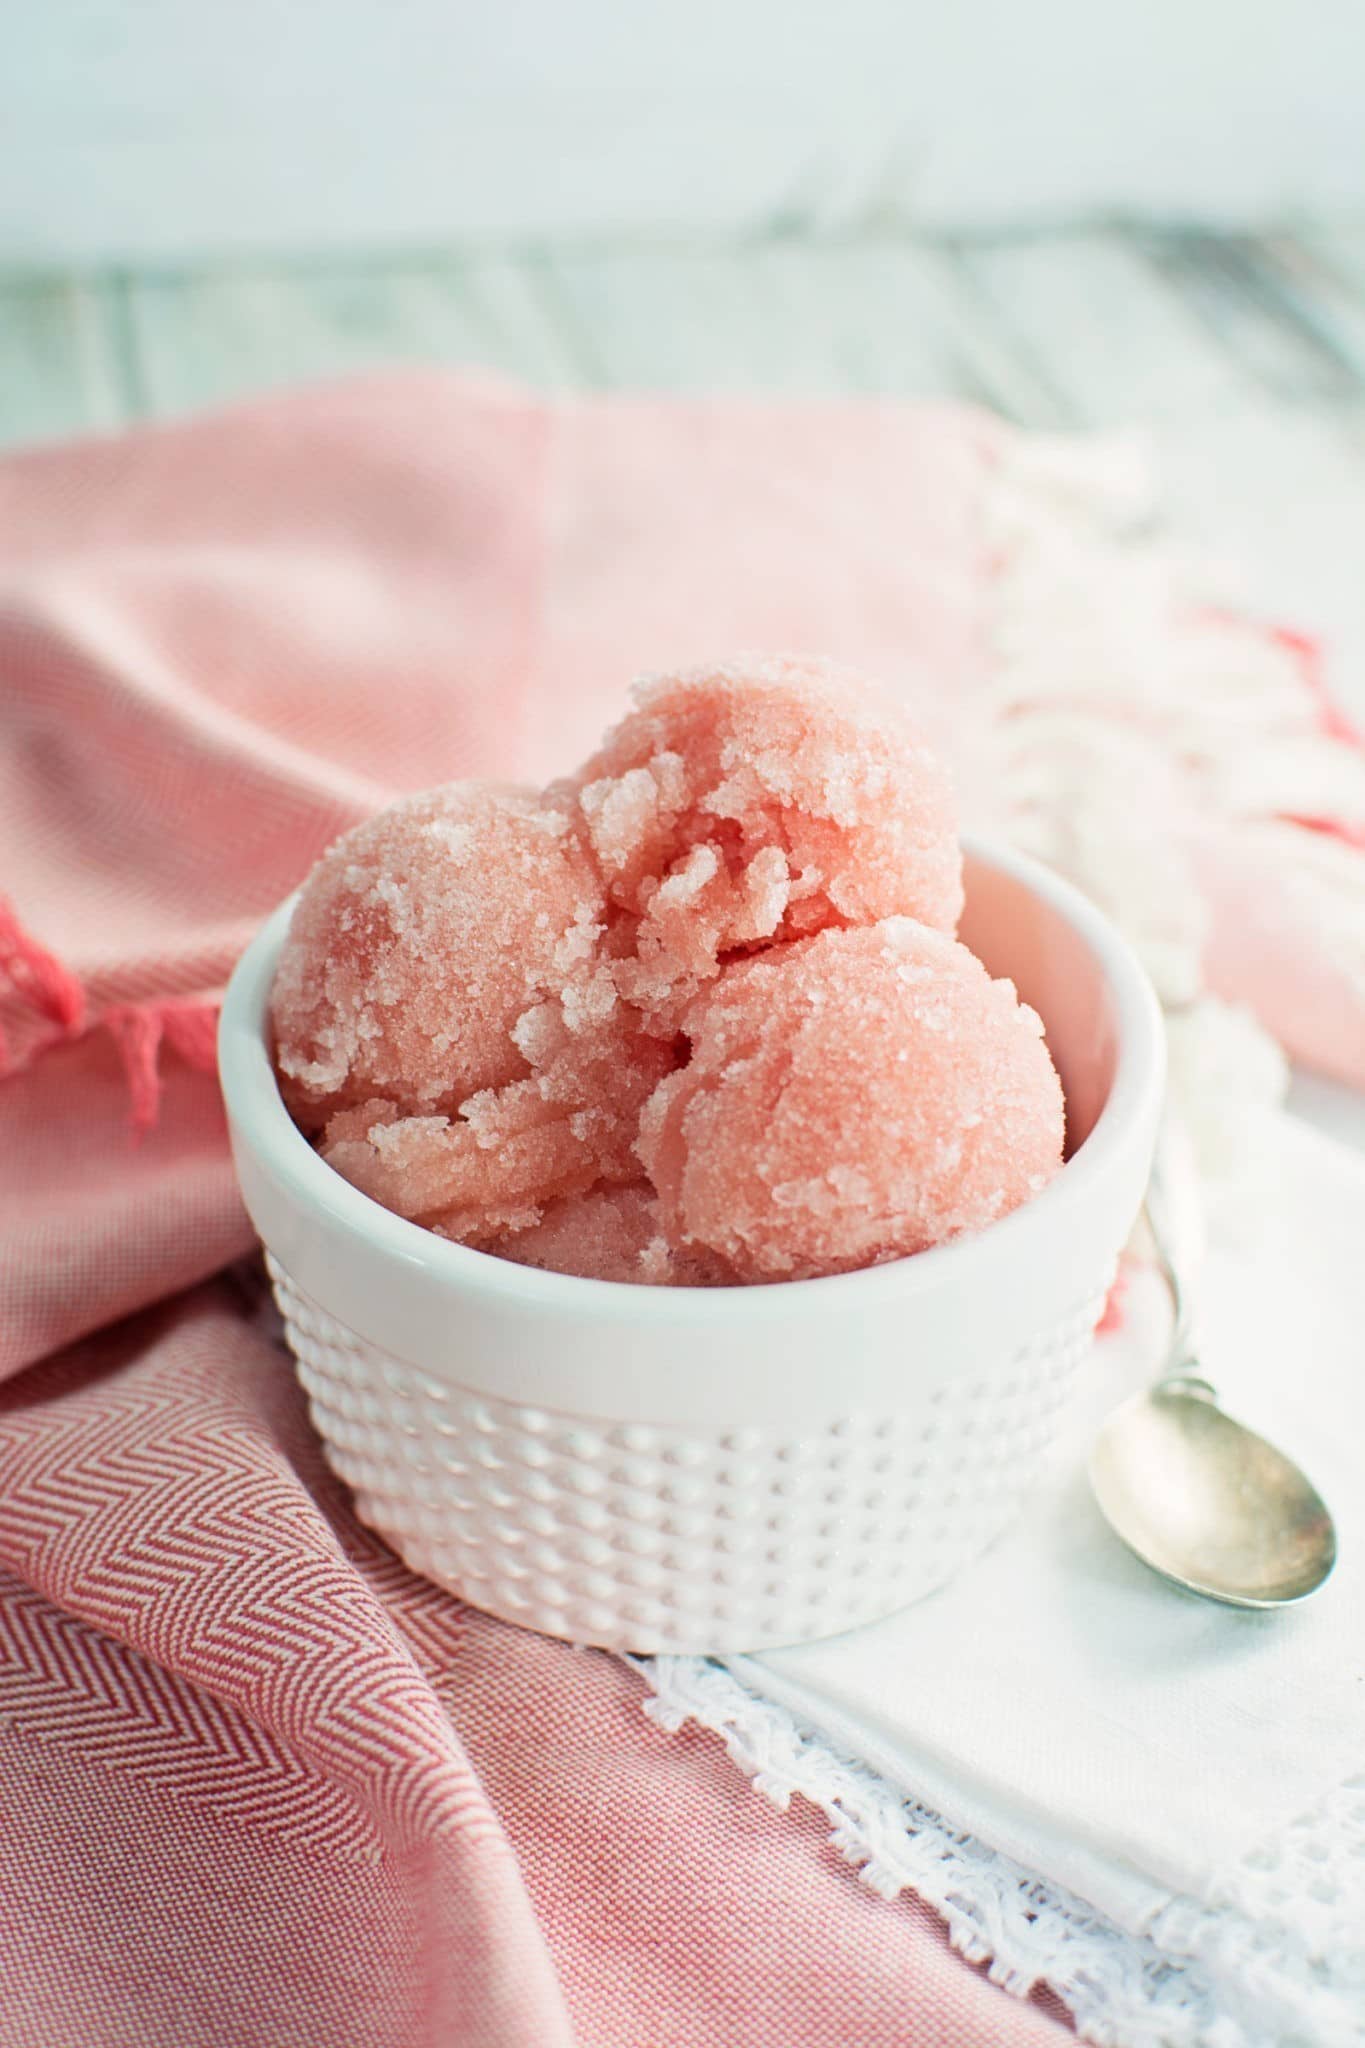 So summery and refreshing, Watermelon Sorbet! Easy to make and a favorite. Find the recipe @LittleFiggyFood